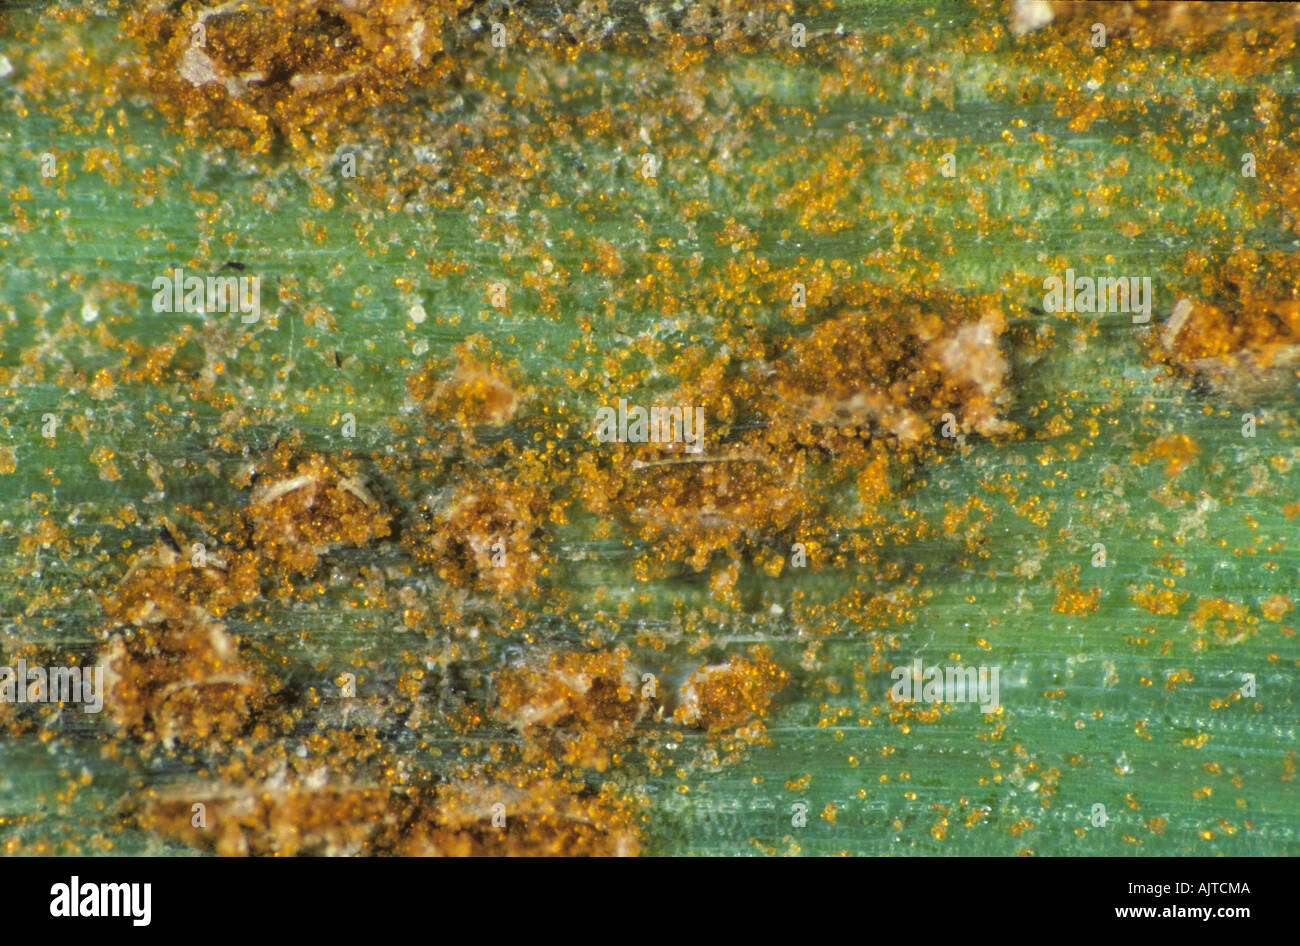 Brown rust Puccinia hordei pustules on a barley leaf Stock Photo